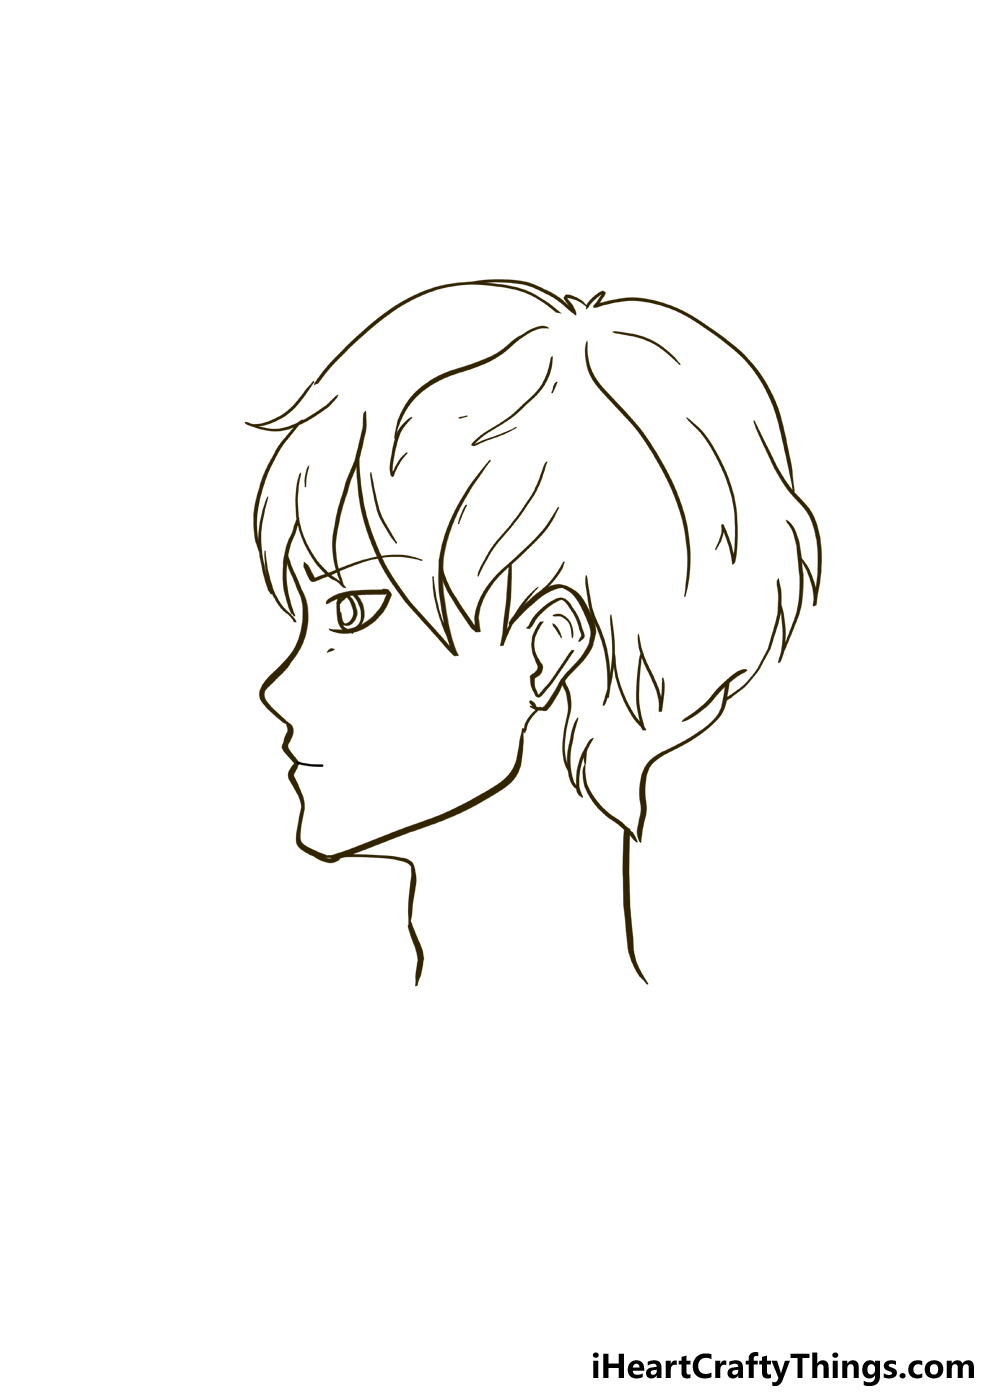 How to Draw An Anime Side Profile step 5